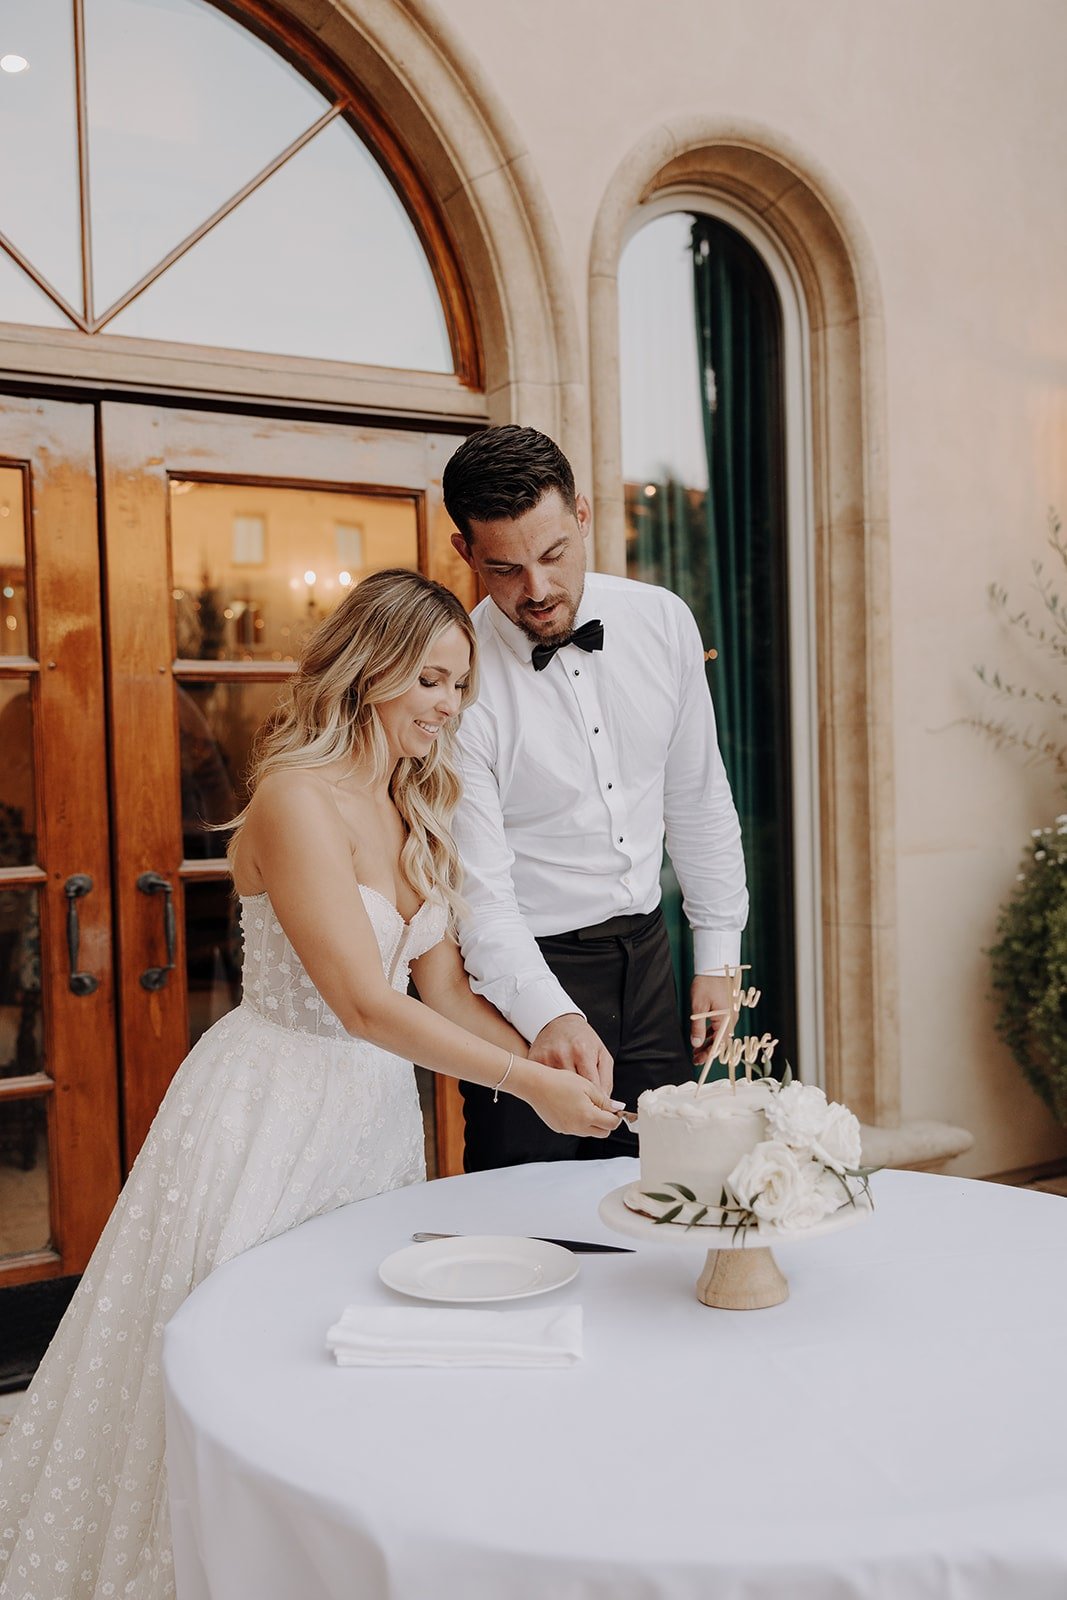 Bride and groom cut the cake at their Tuscan wedding reception in California